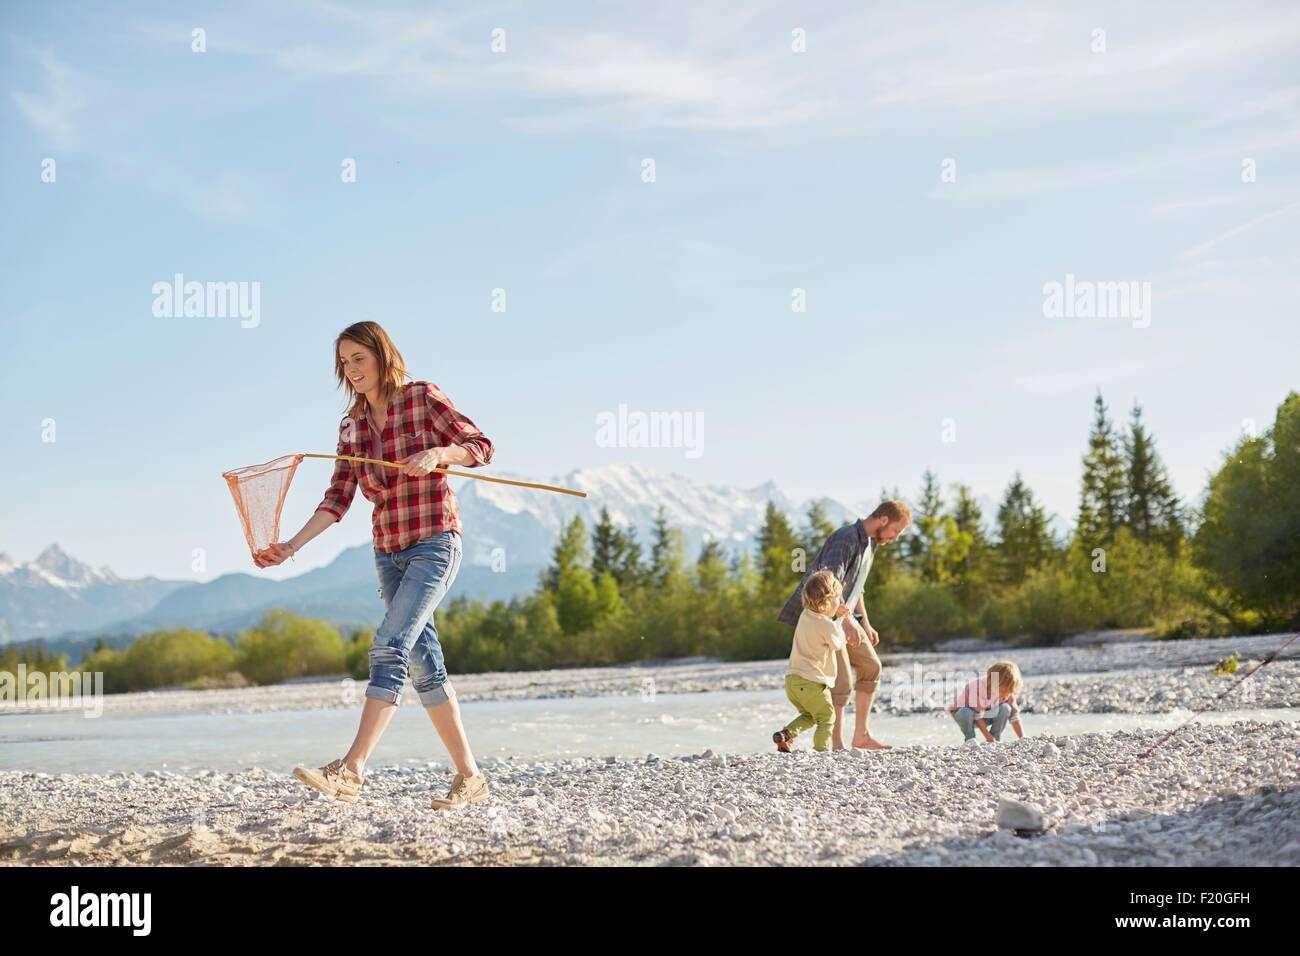 Young woman carrying fishing net by river, people in the background, Wallgau, Bavaria, Germany Stock Photo